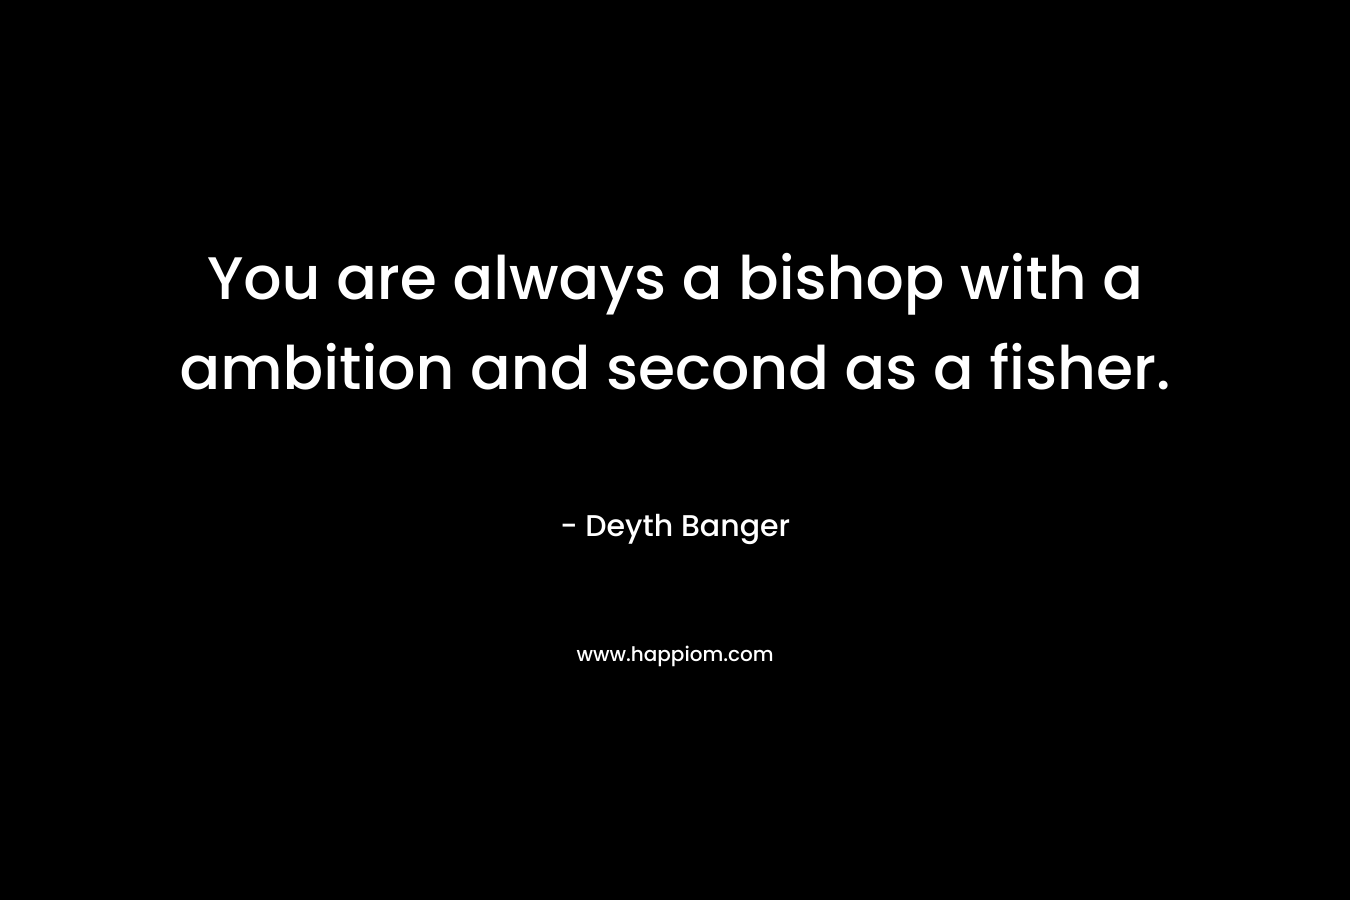 You are always a bishop with a ambition and second as a fisher.